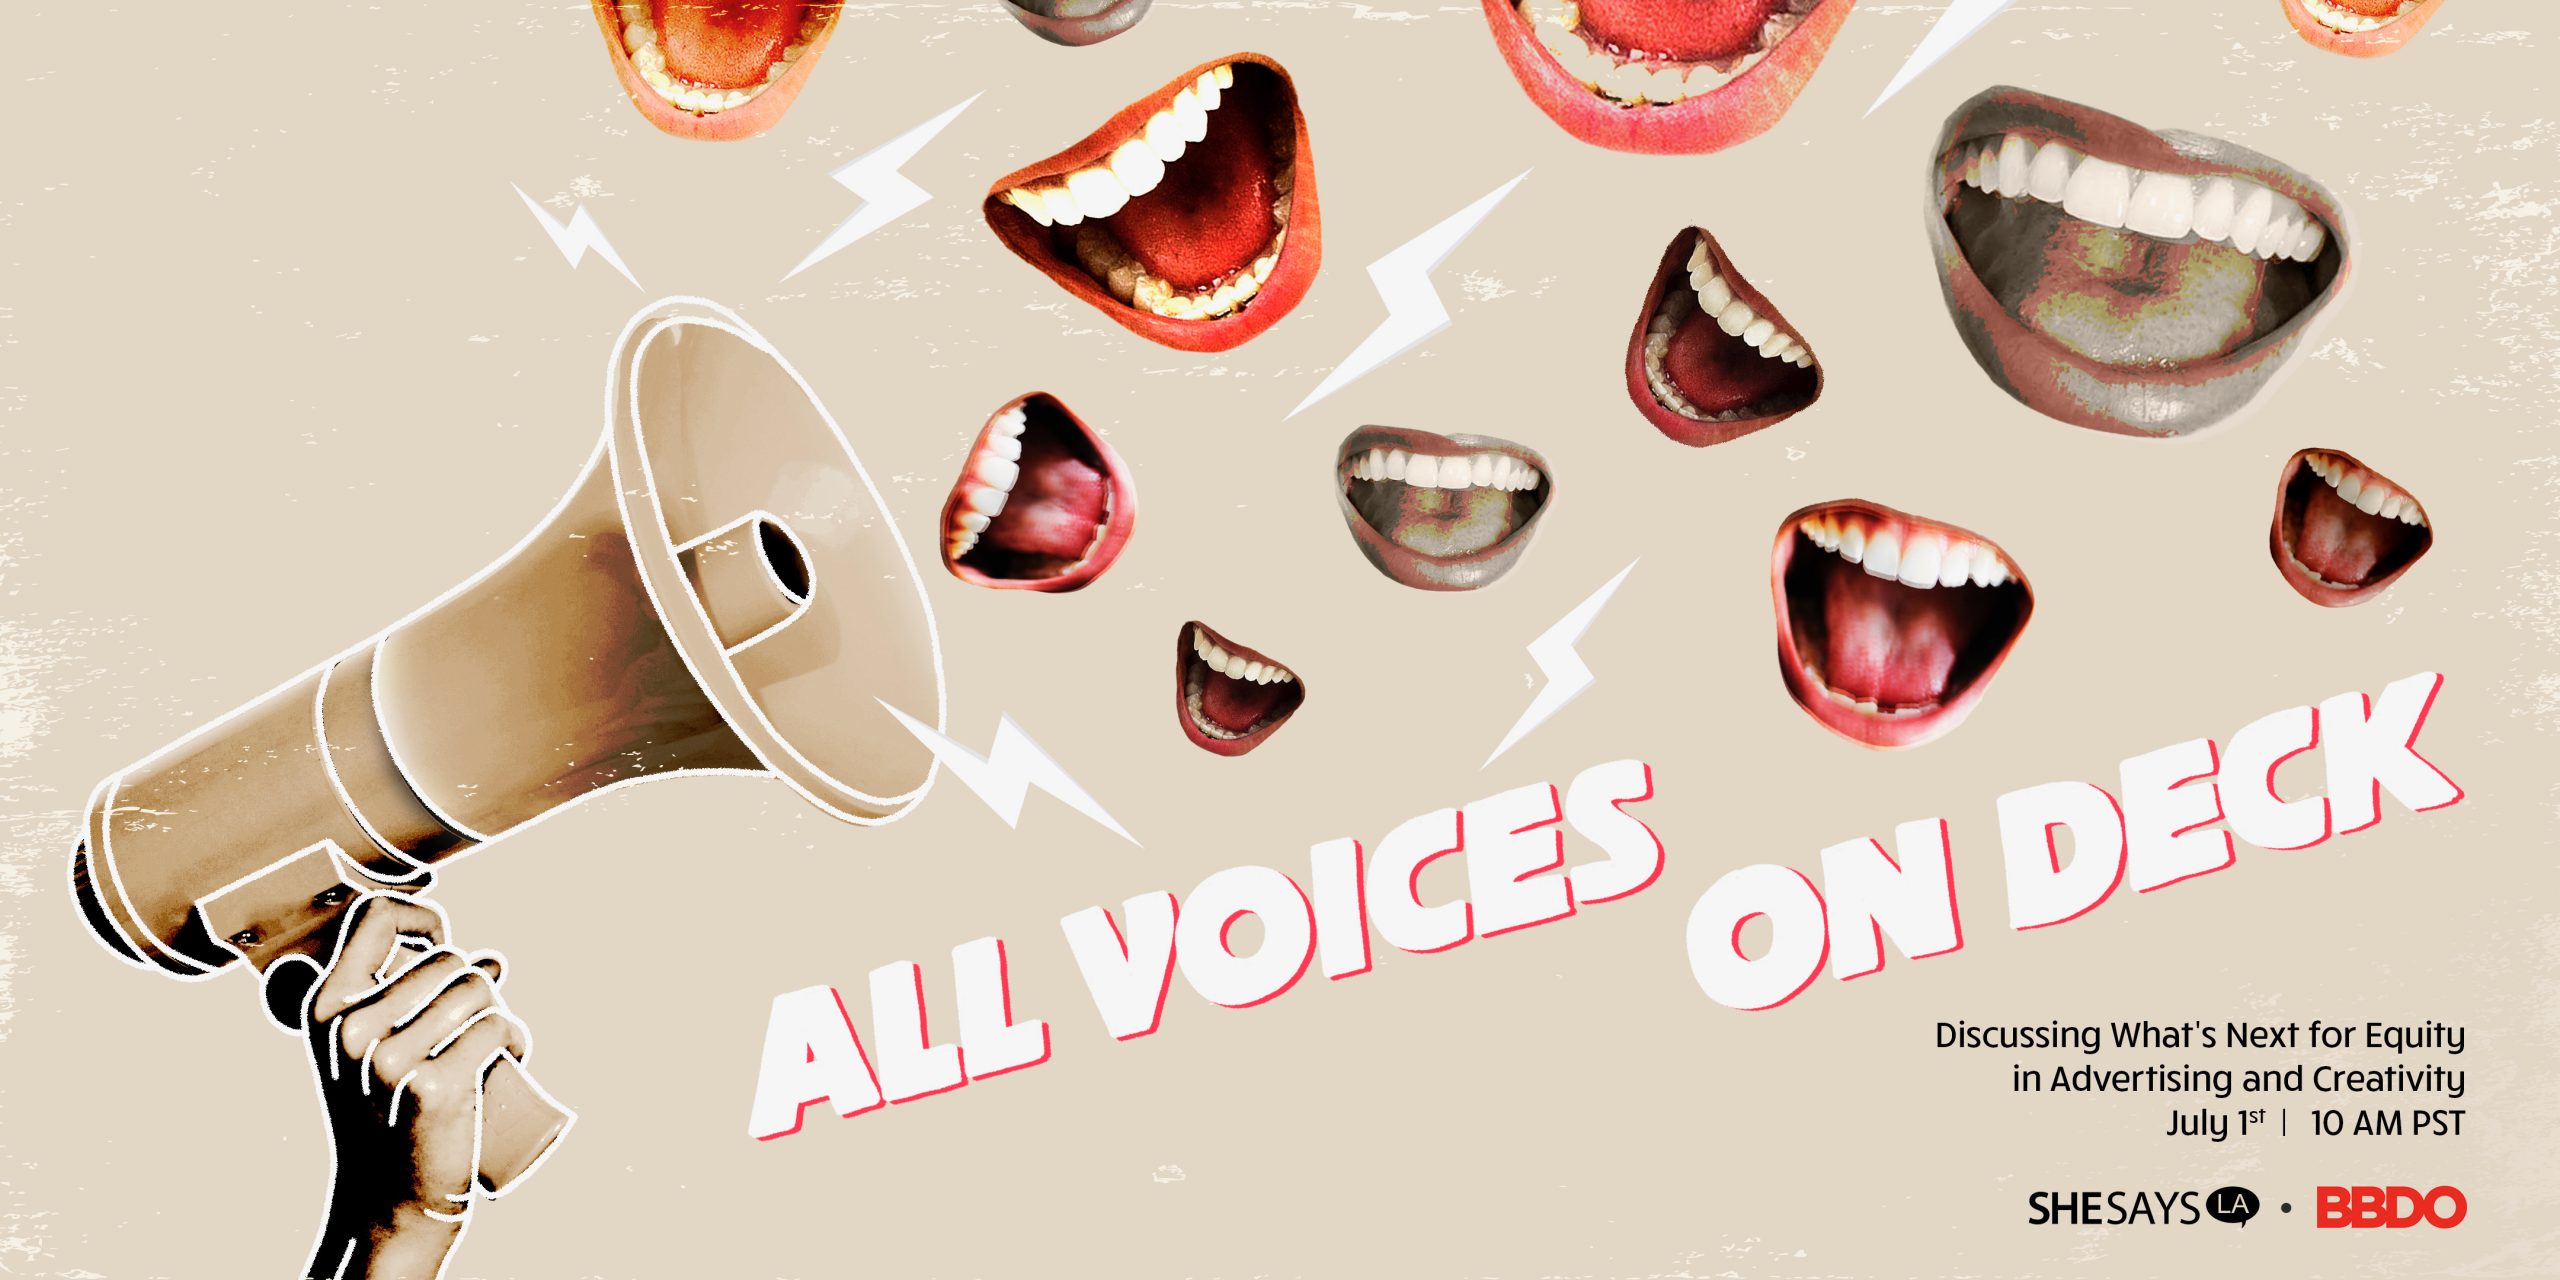 All Voices on Deck